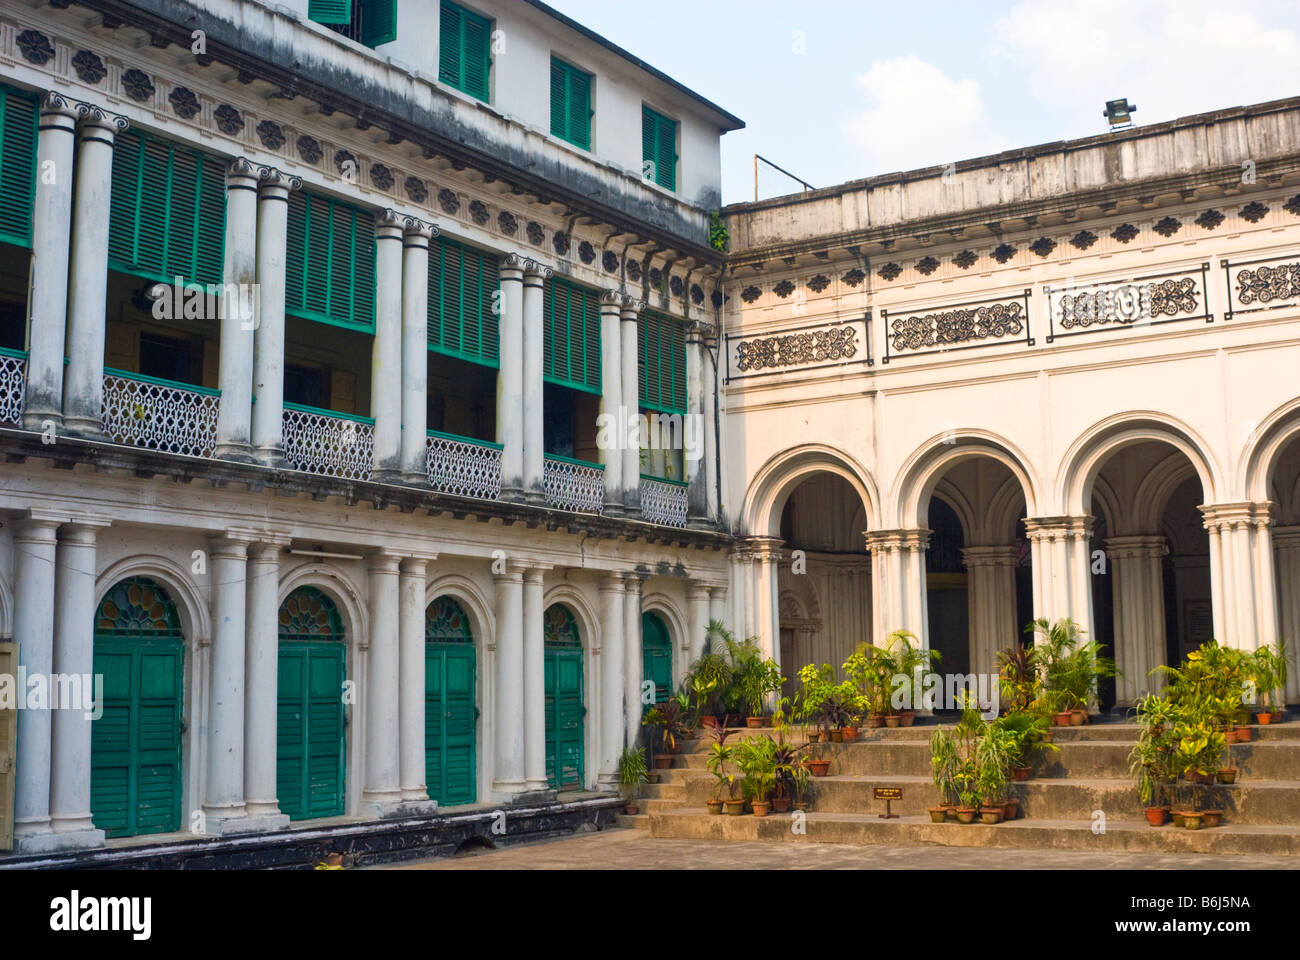 Courtyard in the Bengali poet Tagore's house in Kolkata, India Stock Photo